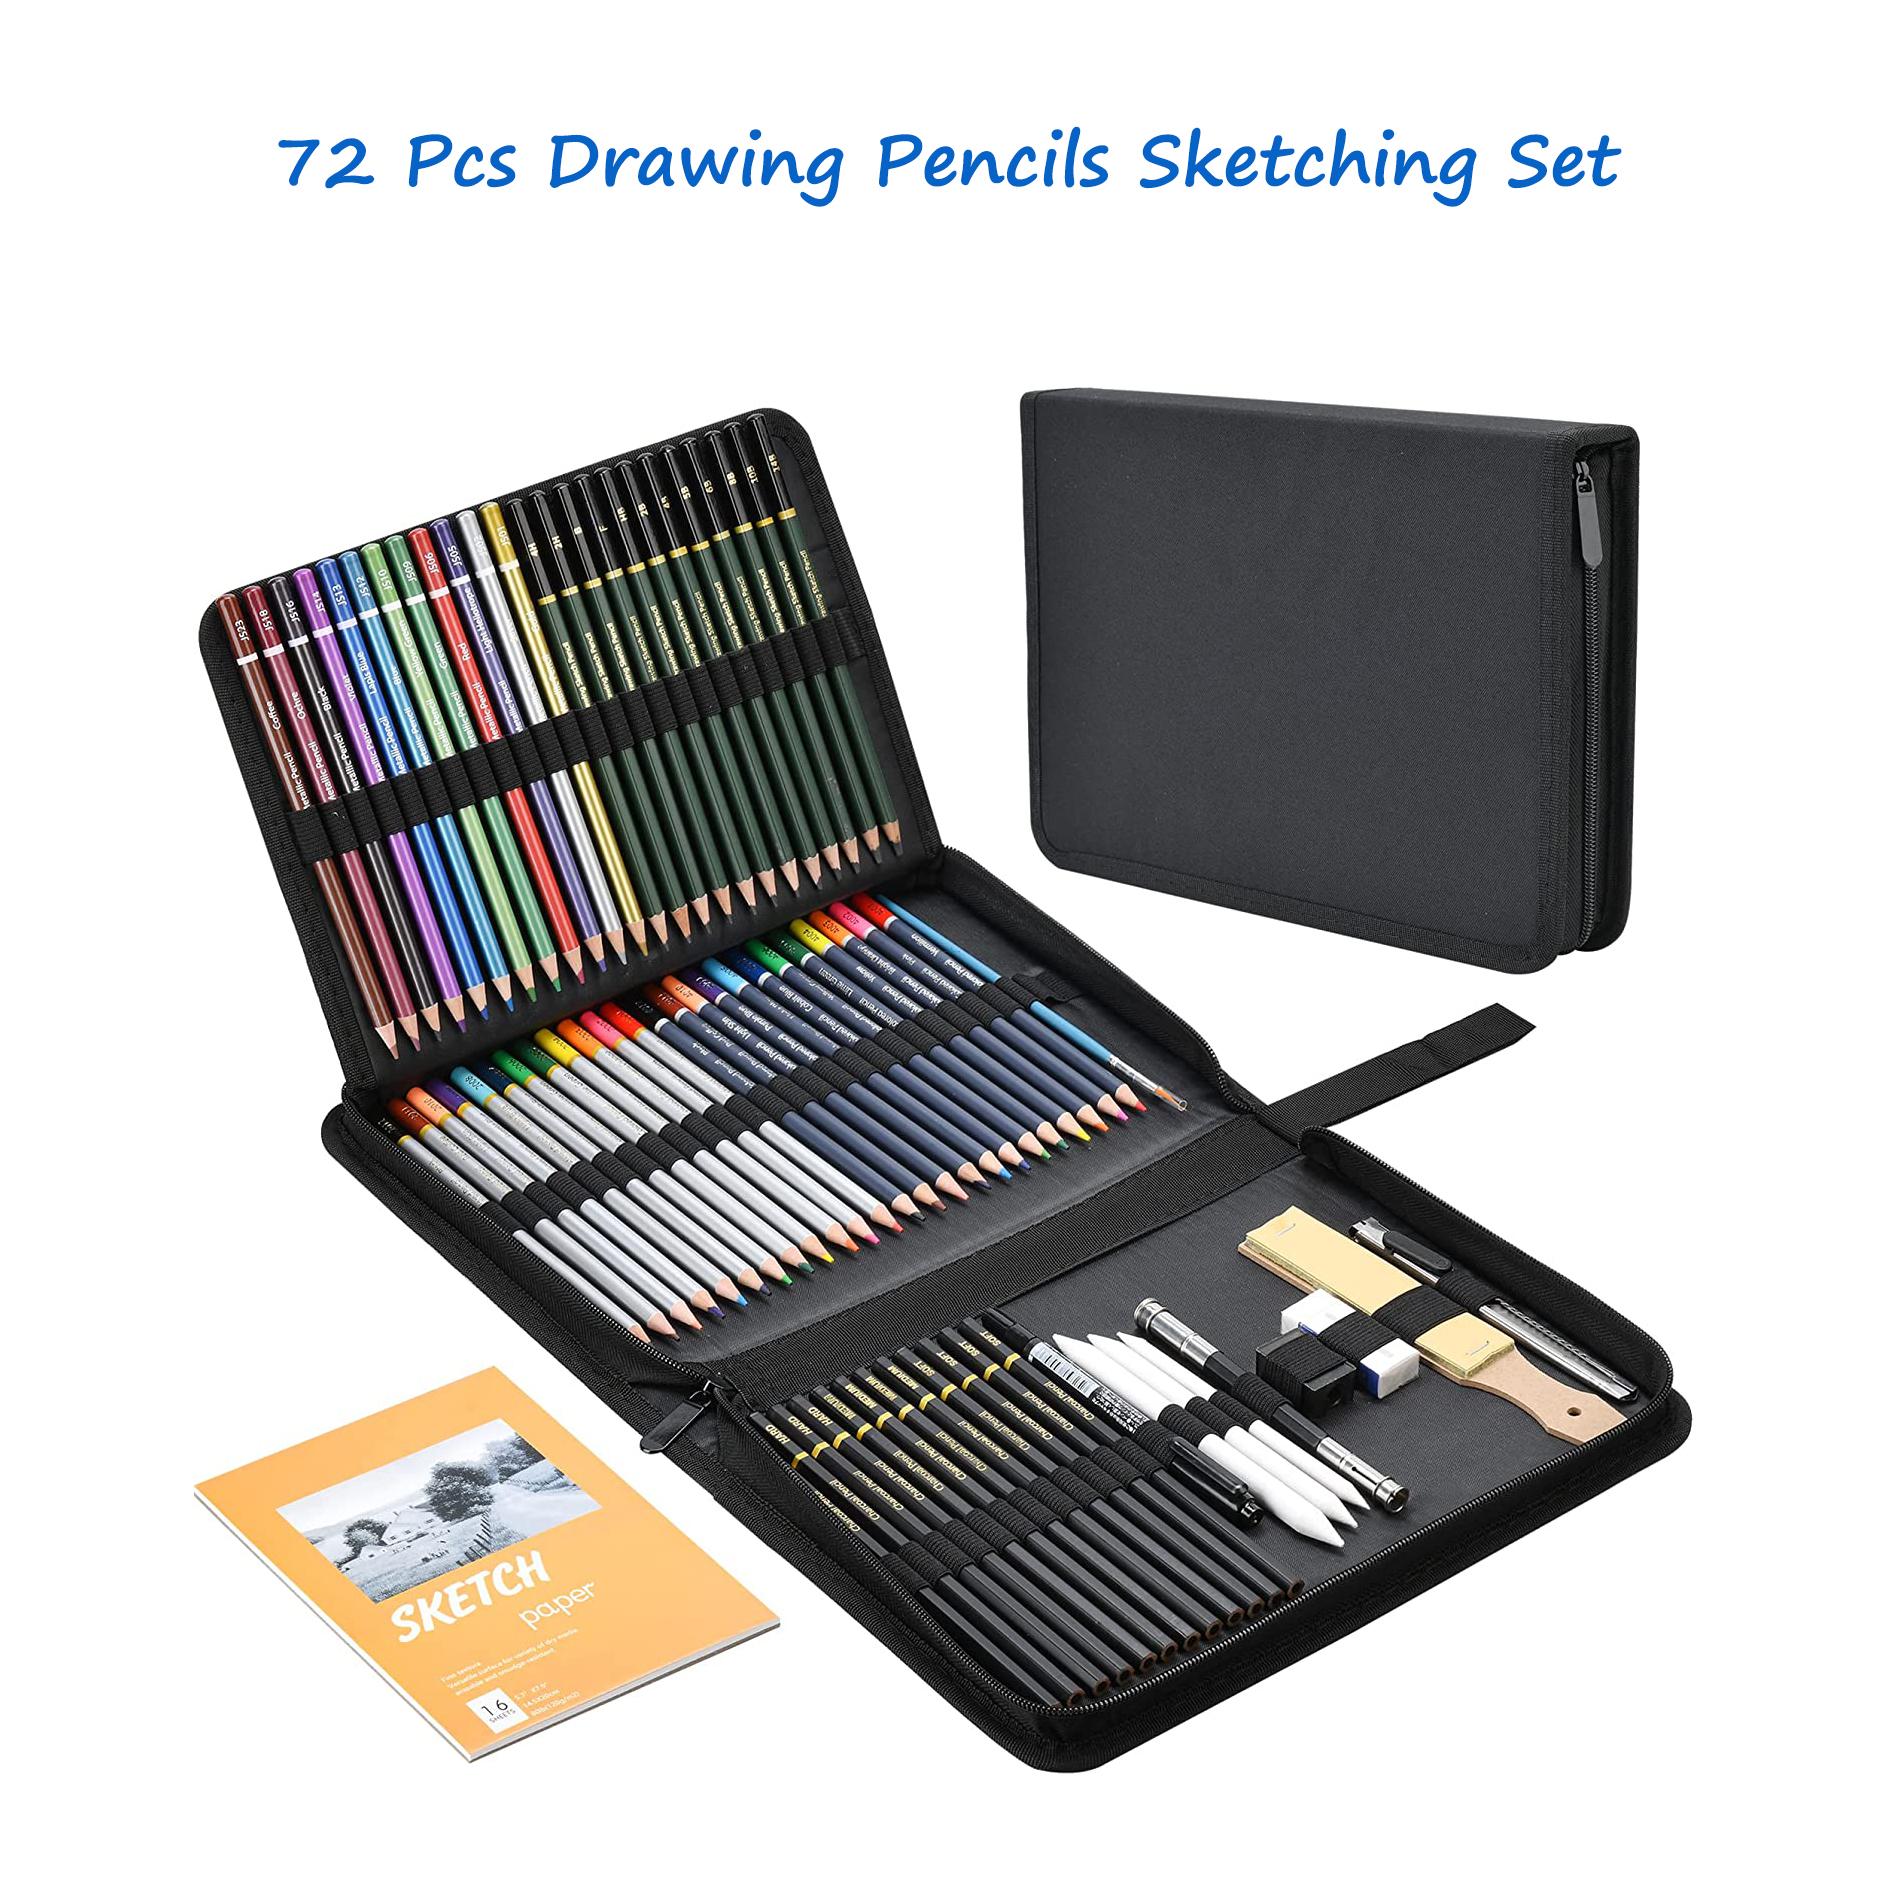 Sketch Set - essential tools for sketching and drawing, 7 pcs.